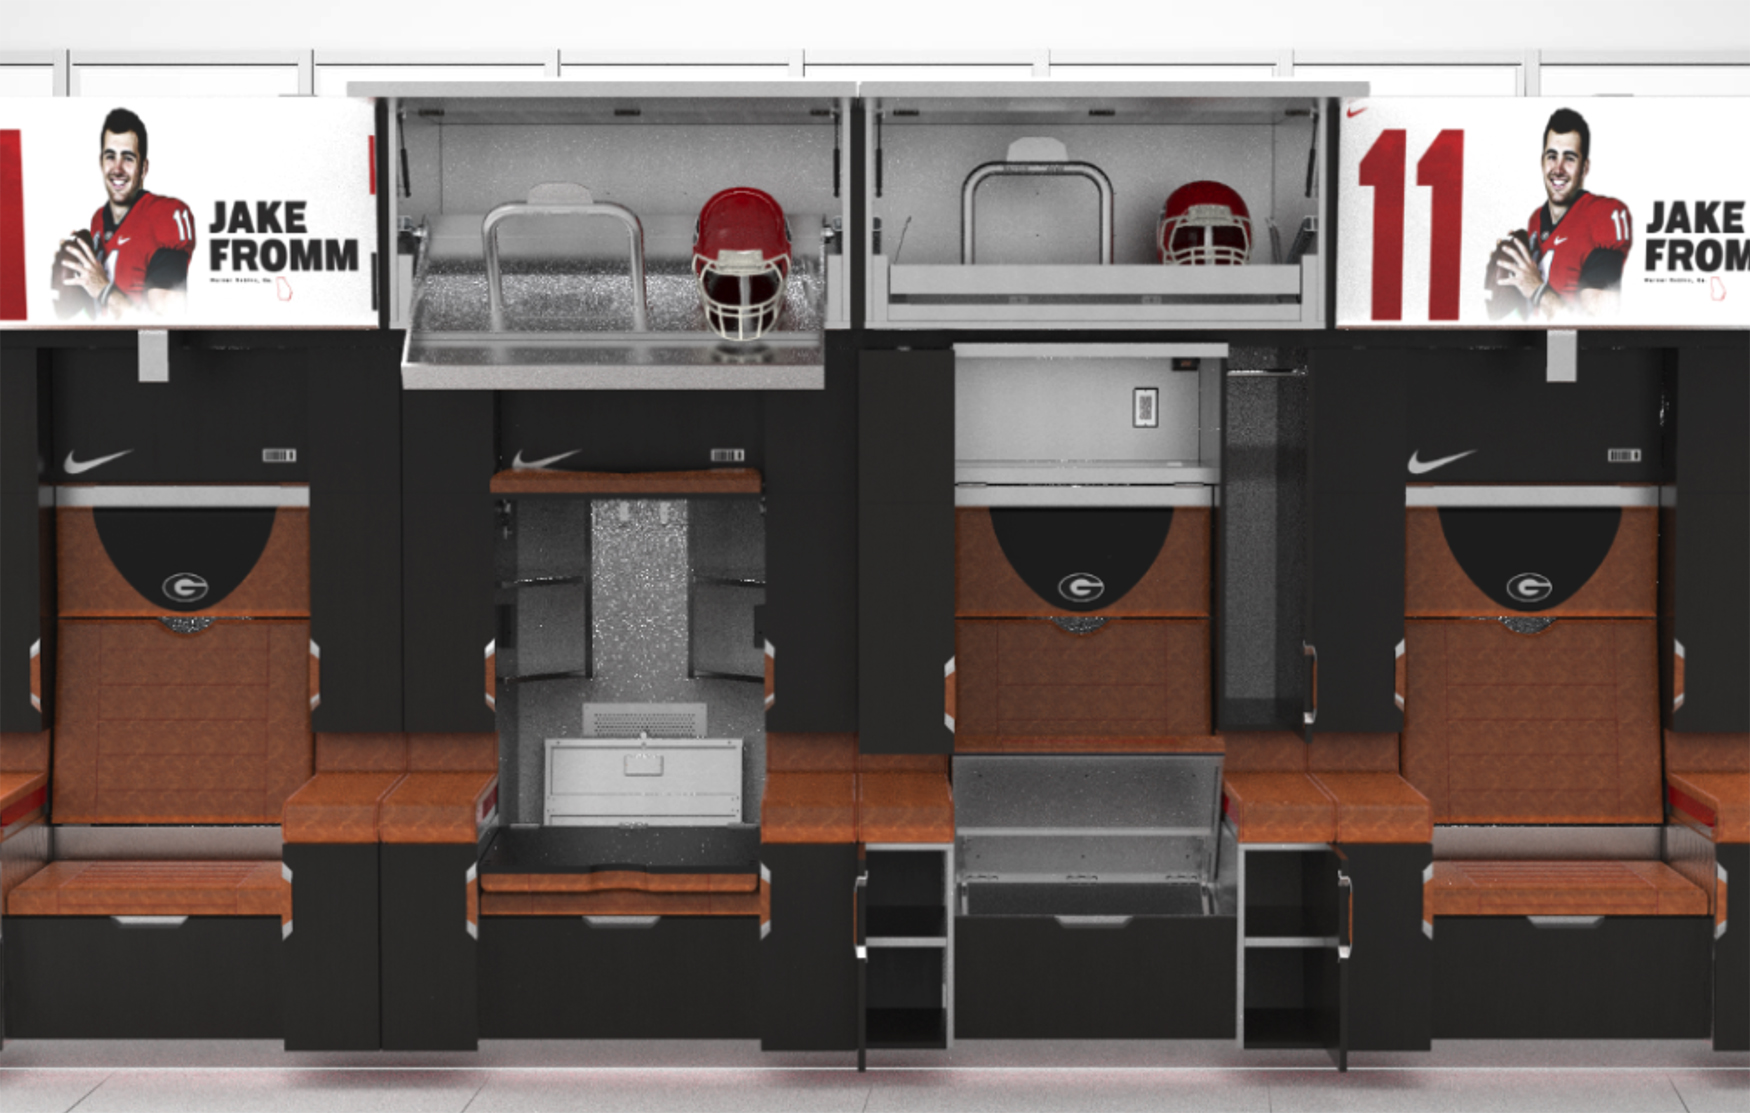 Uga Players To Enjoy Air Conditioned Lockers Reclining And Wider Seats